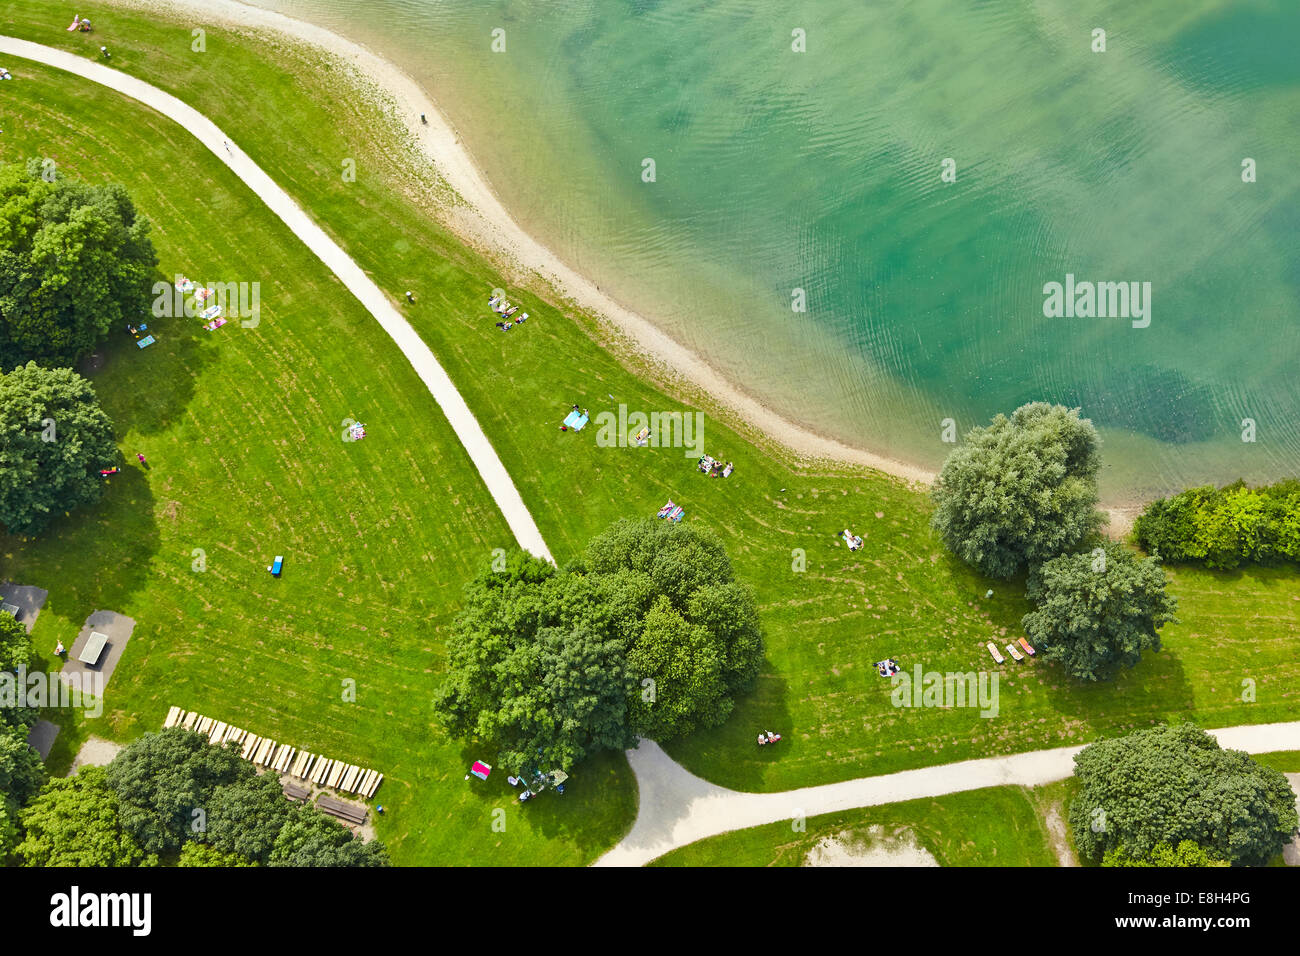 Germany, Bavaria, Feldkirchen, aerial view of people at lakeshore Stock Photo